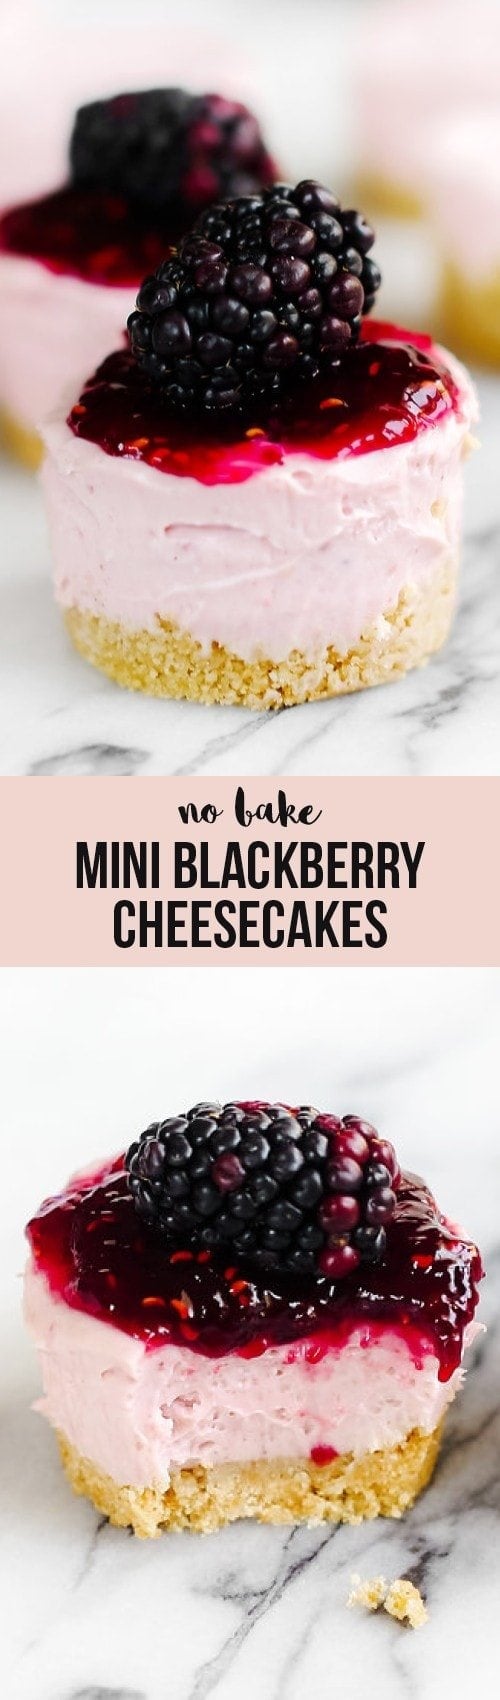 Adorable No Bake Mini Blackberry Cheesecakes are ultra fresh, vibrant, and simple to make with no oven (or even stove) required! Perfect for spring or summer.